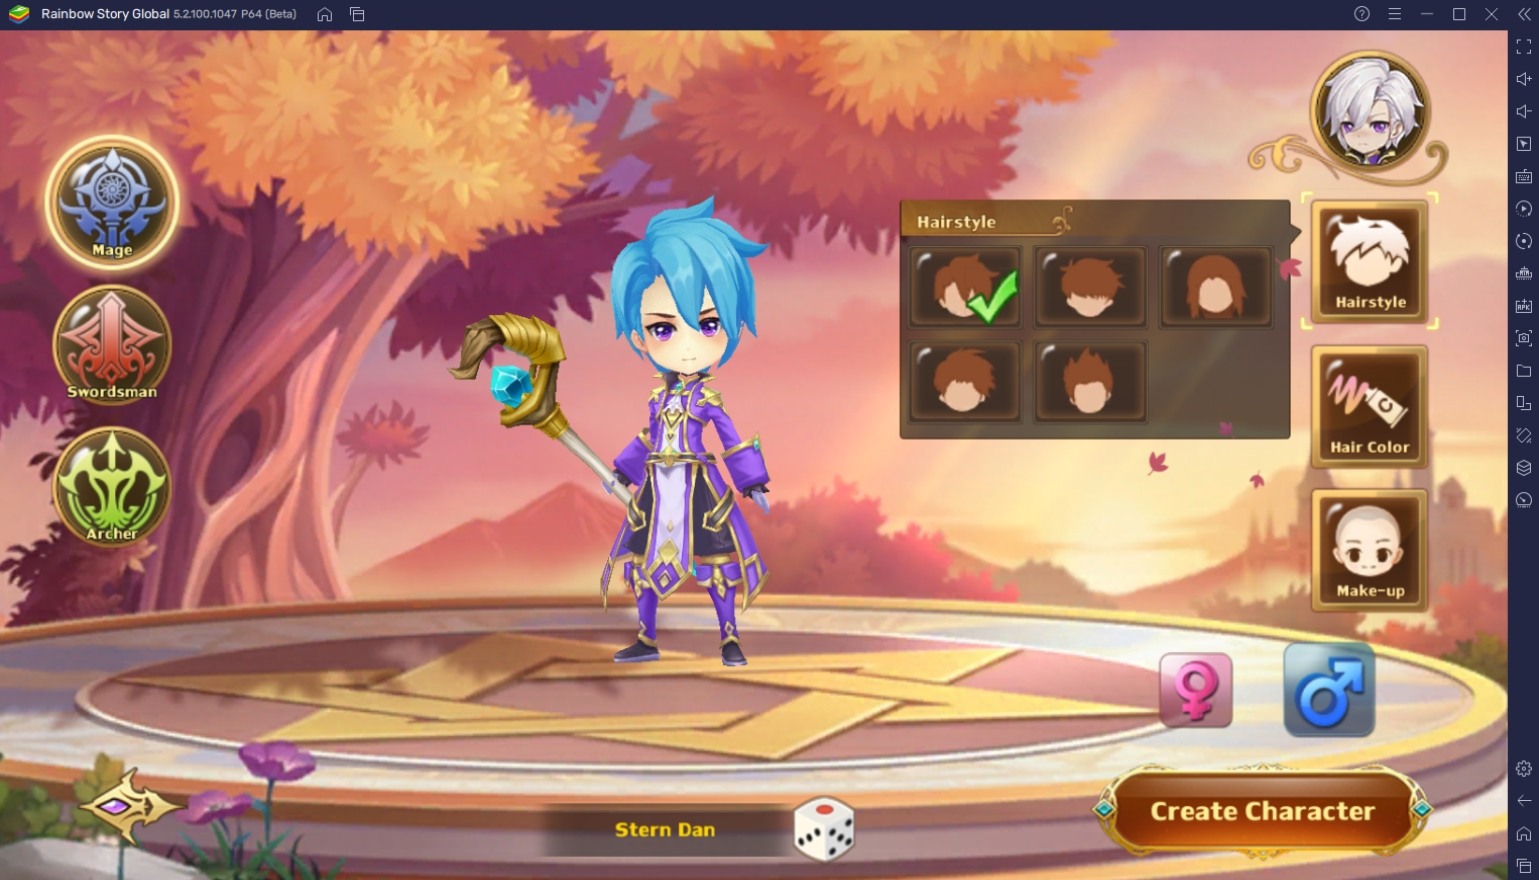 BlueStacks' Beginners Guide to Playing Rainbow Story Global